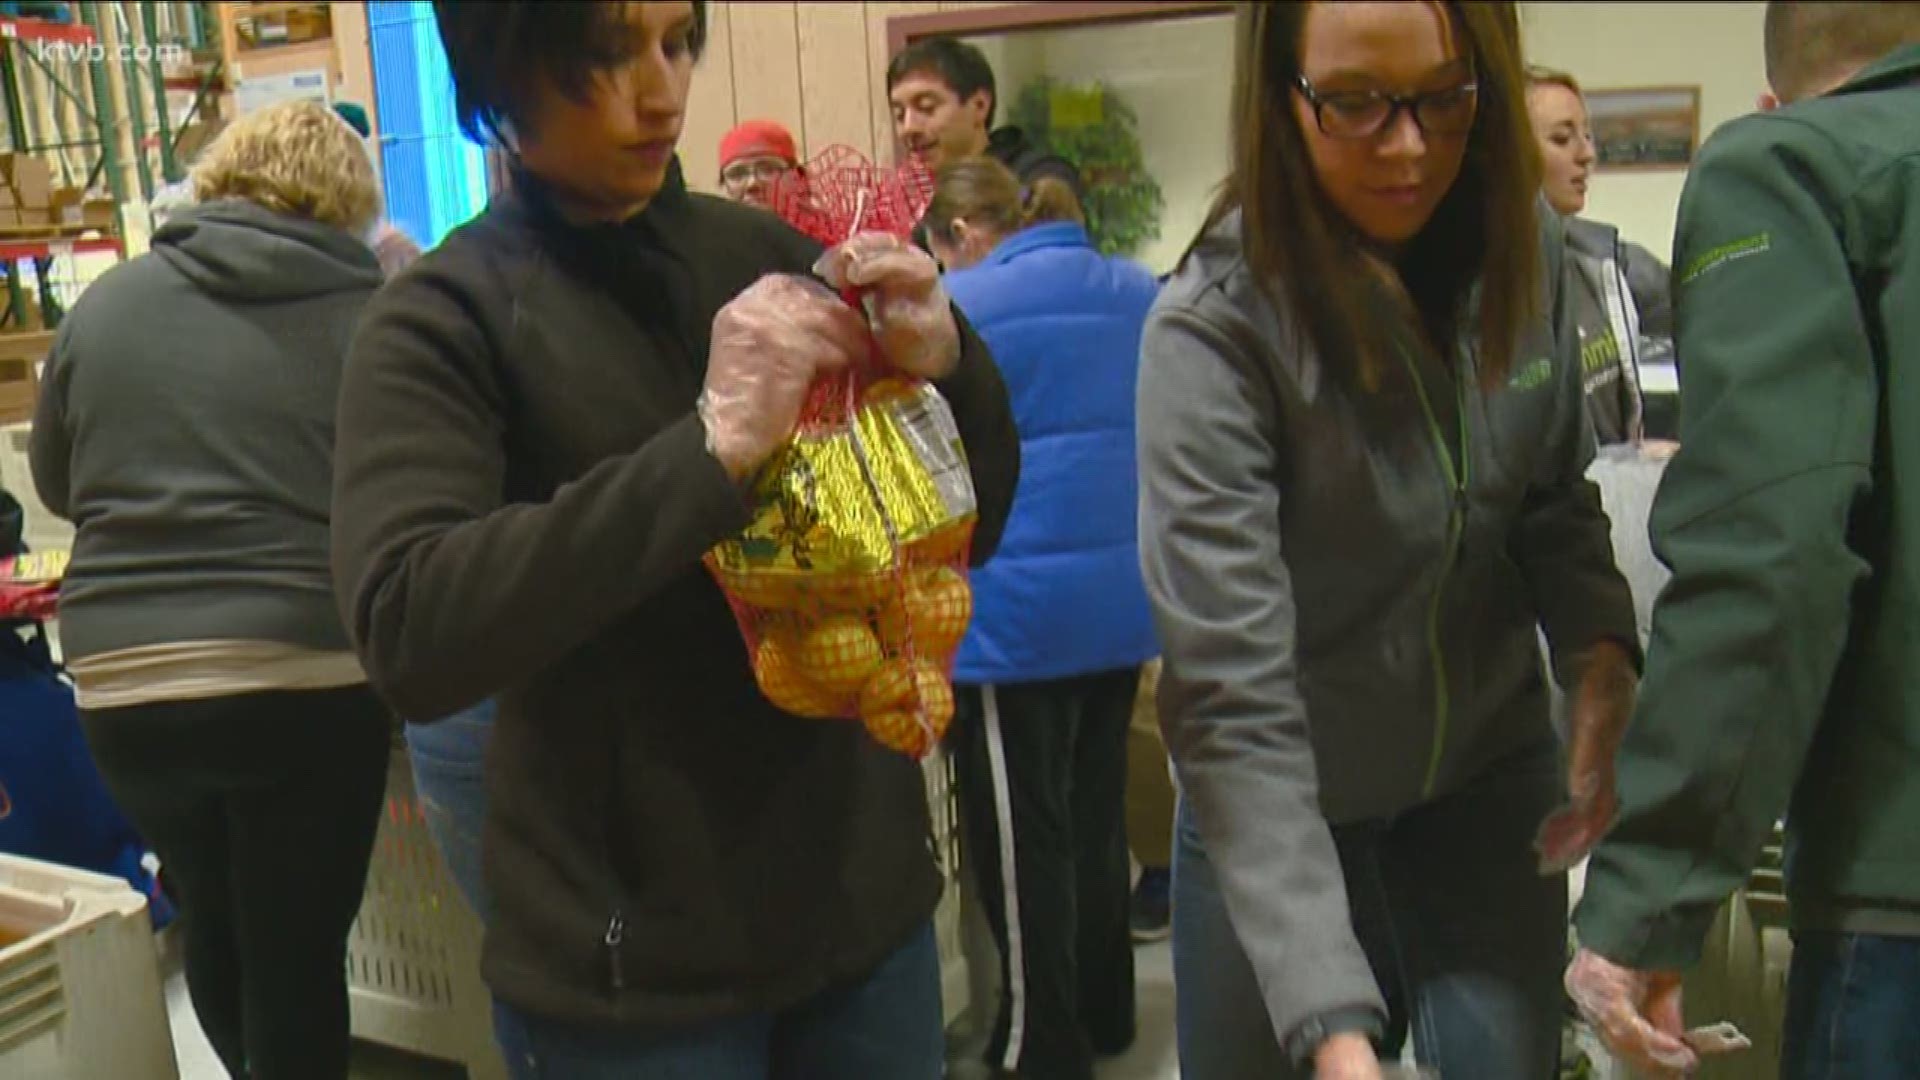 The foodbank tells us there are a lot of Idahoans who struggle with putting food on the table.